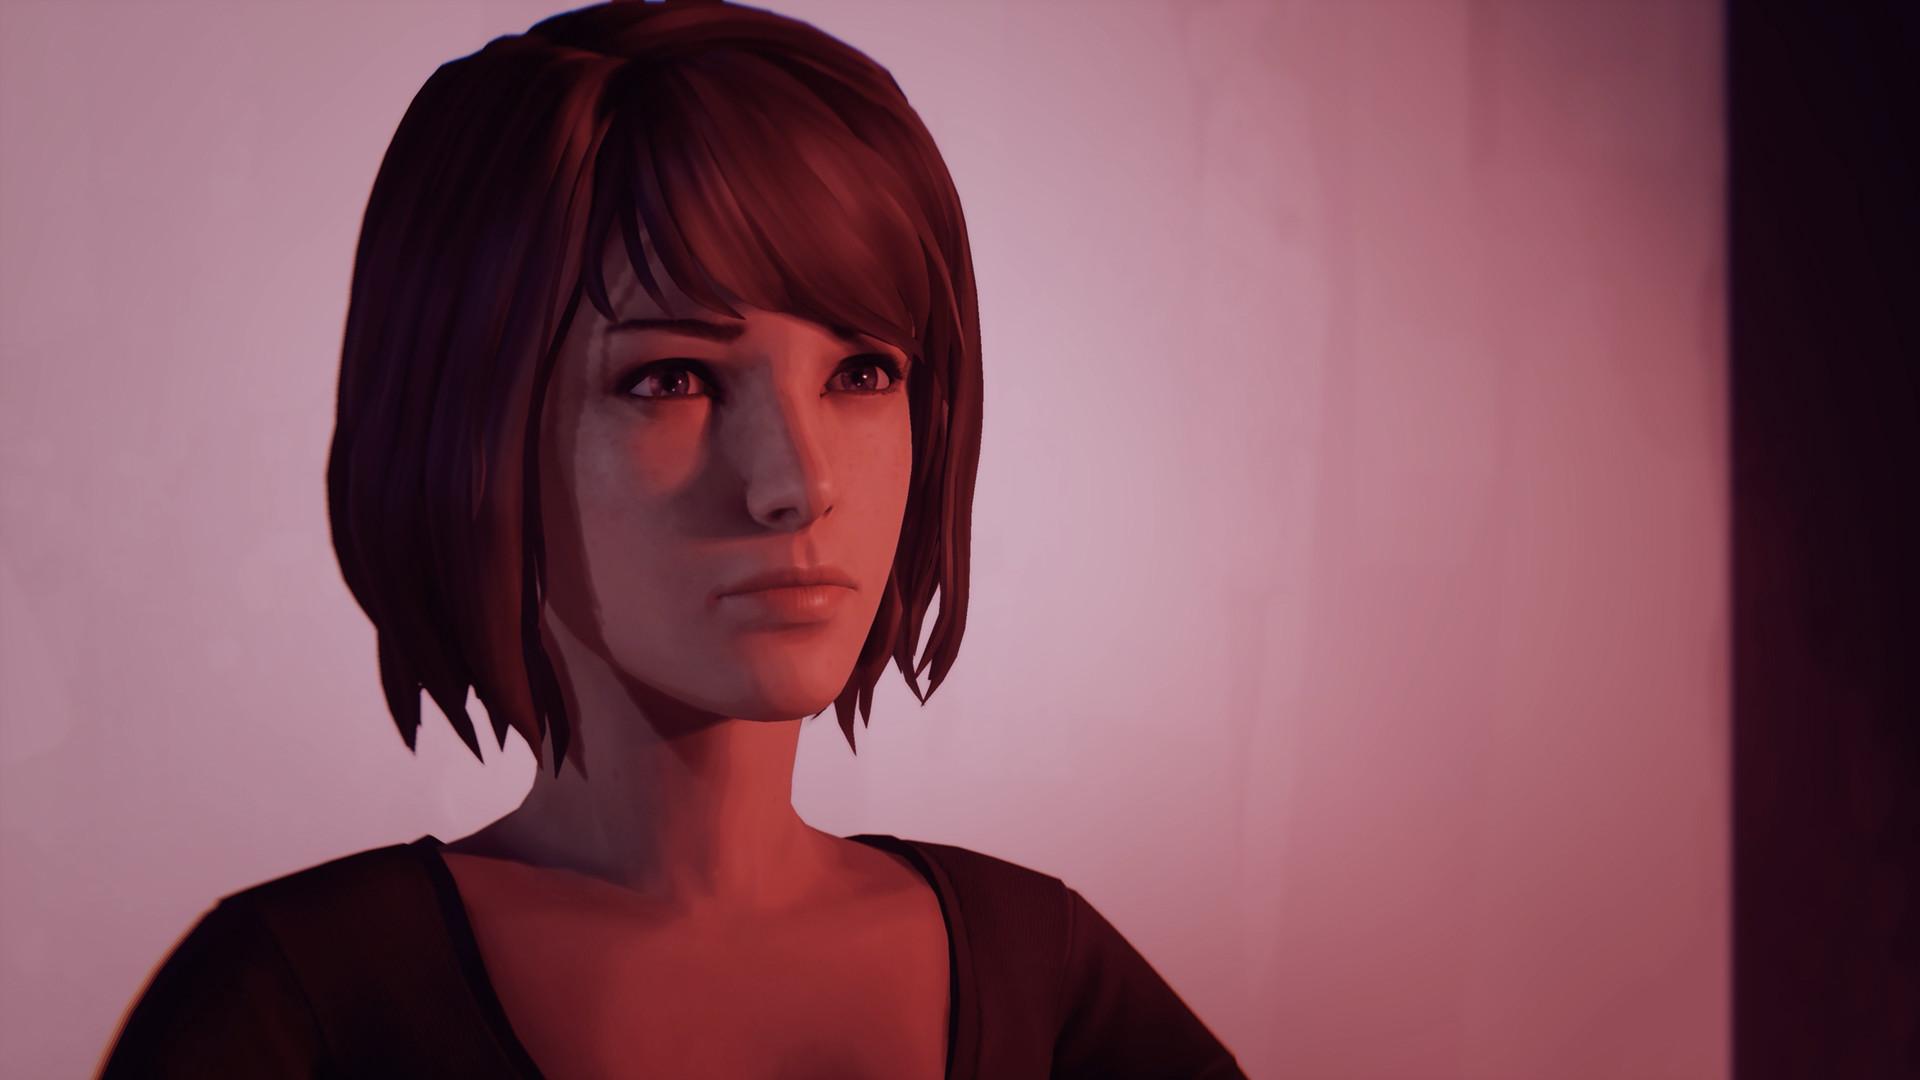 Screenshot №5 from game Life is Strange Remastered